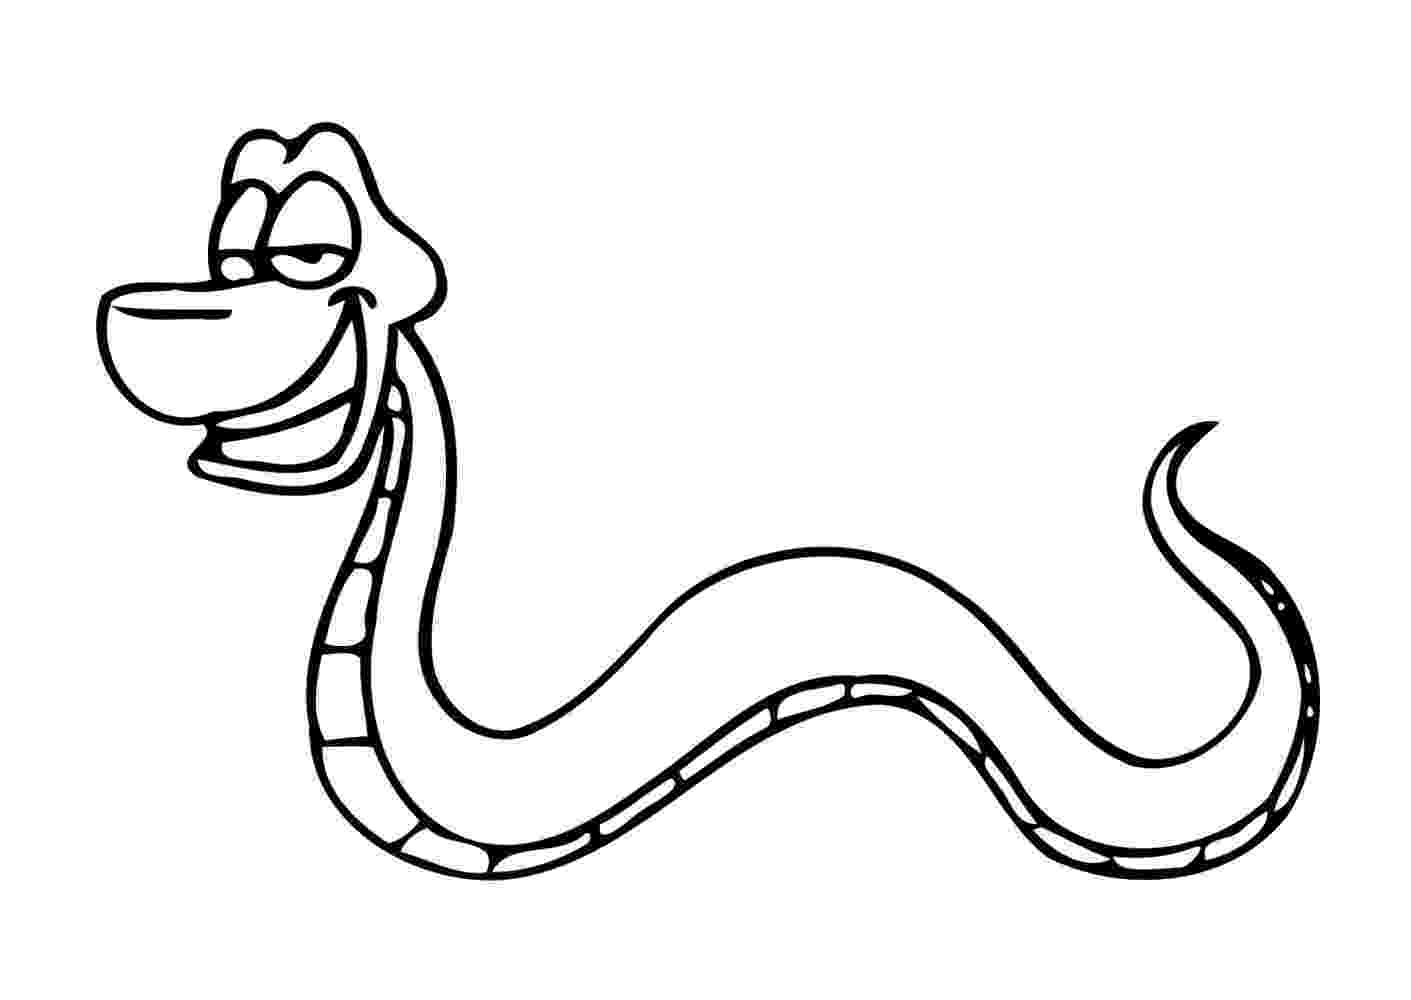 snake colouring picture snake coloring pages colouring picture snake 